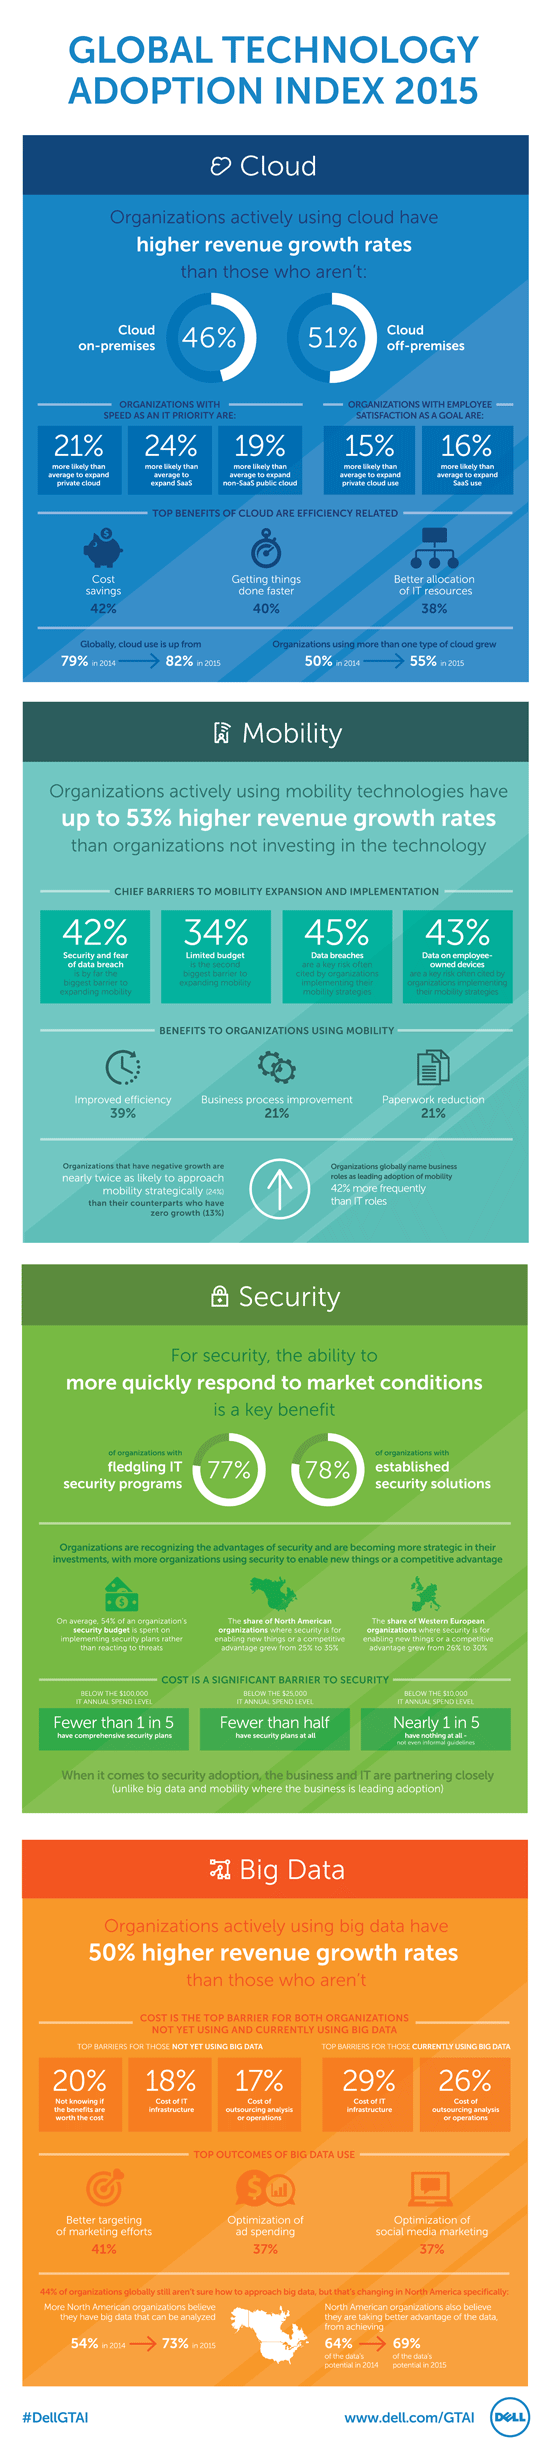  Dell Global Technology Index 2015 overview infographic